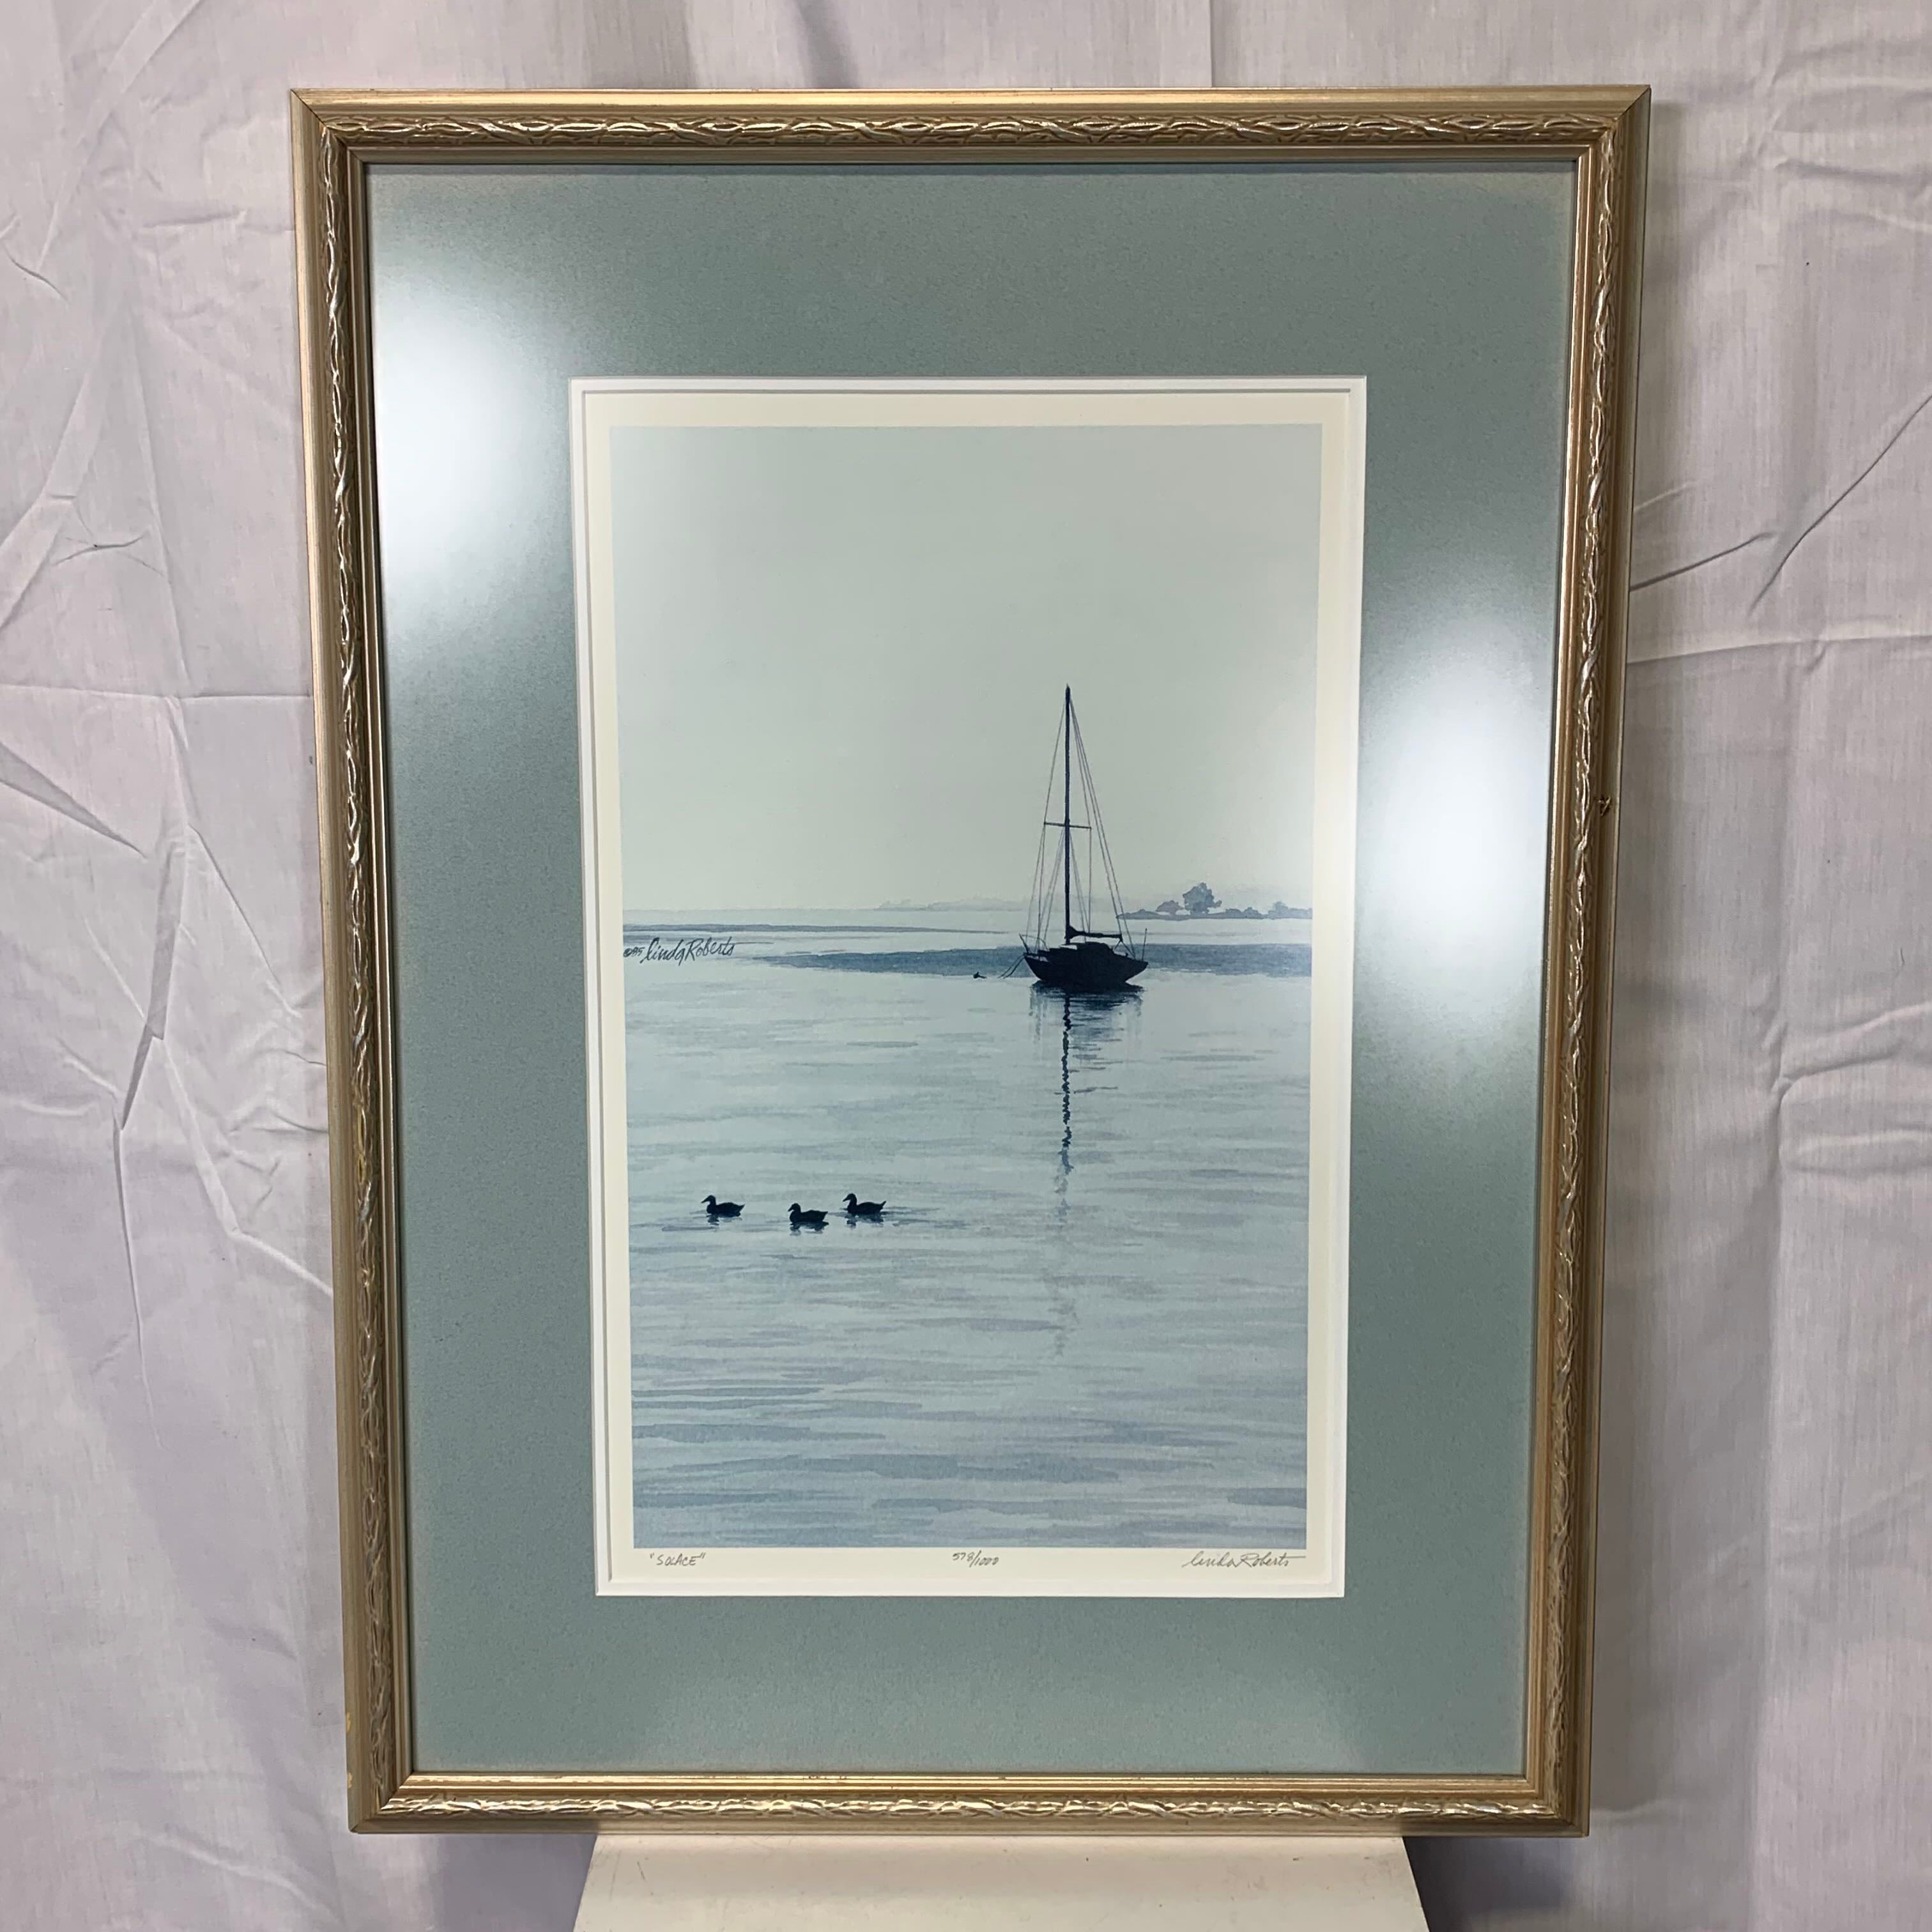 19"x 25.5" Solace by Linda Roberts Framed and Signed Print 578/1000